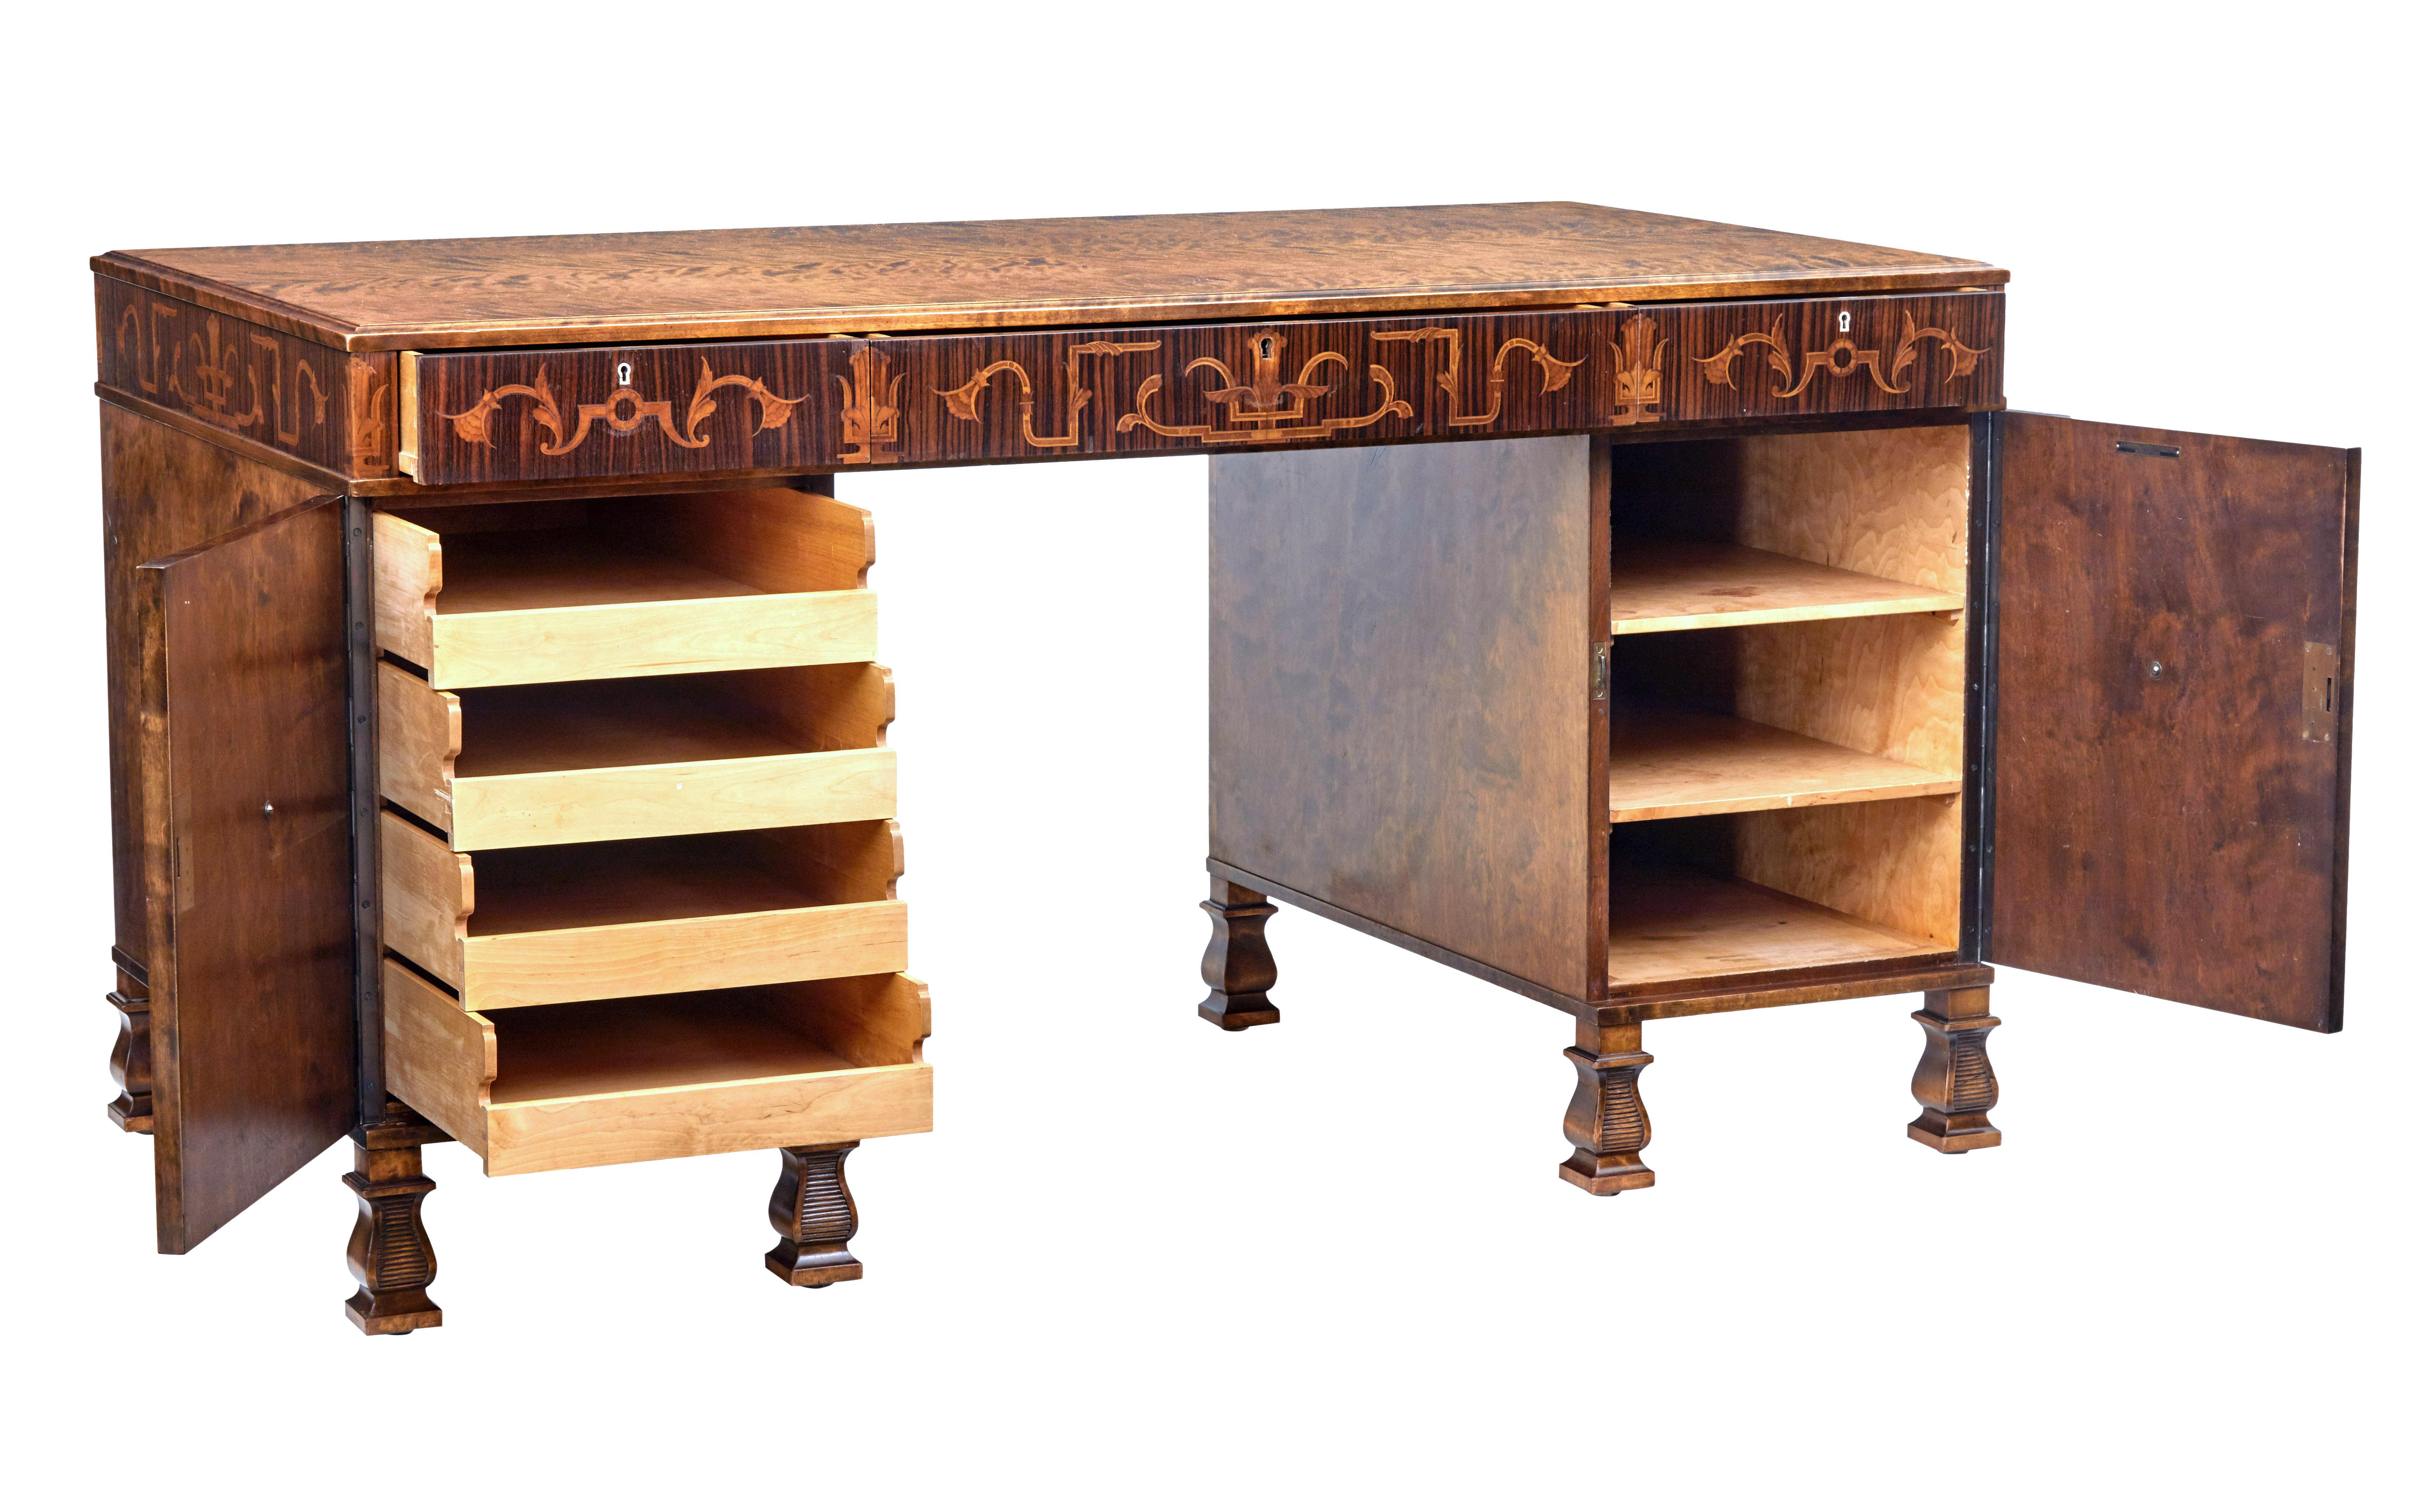 Fine quality 3 piece pedestal desk designed by Carl Malmsten for Bodafors, circa 1940.

Burr birch writing surface below which is an elaborate inlaid frieze of Brazilian rosewood, walnut and satinwood. 3 drawers above the knee.

Left hand